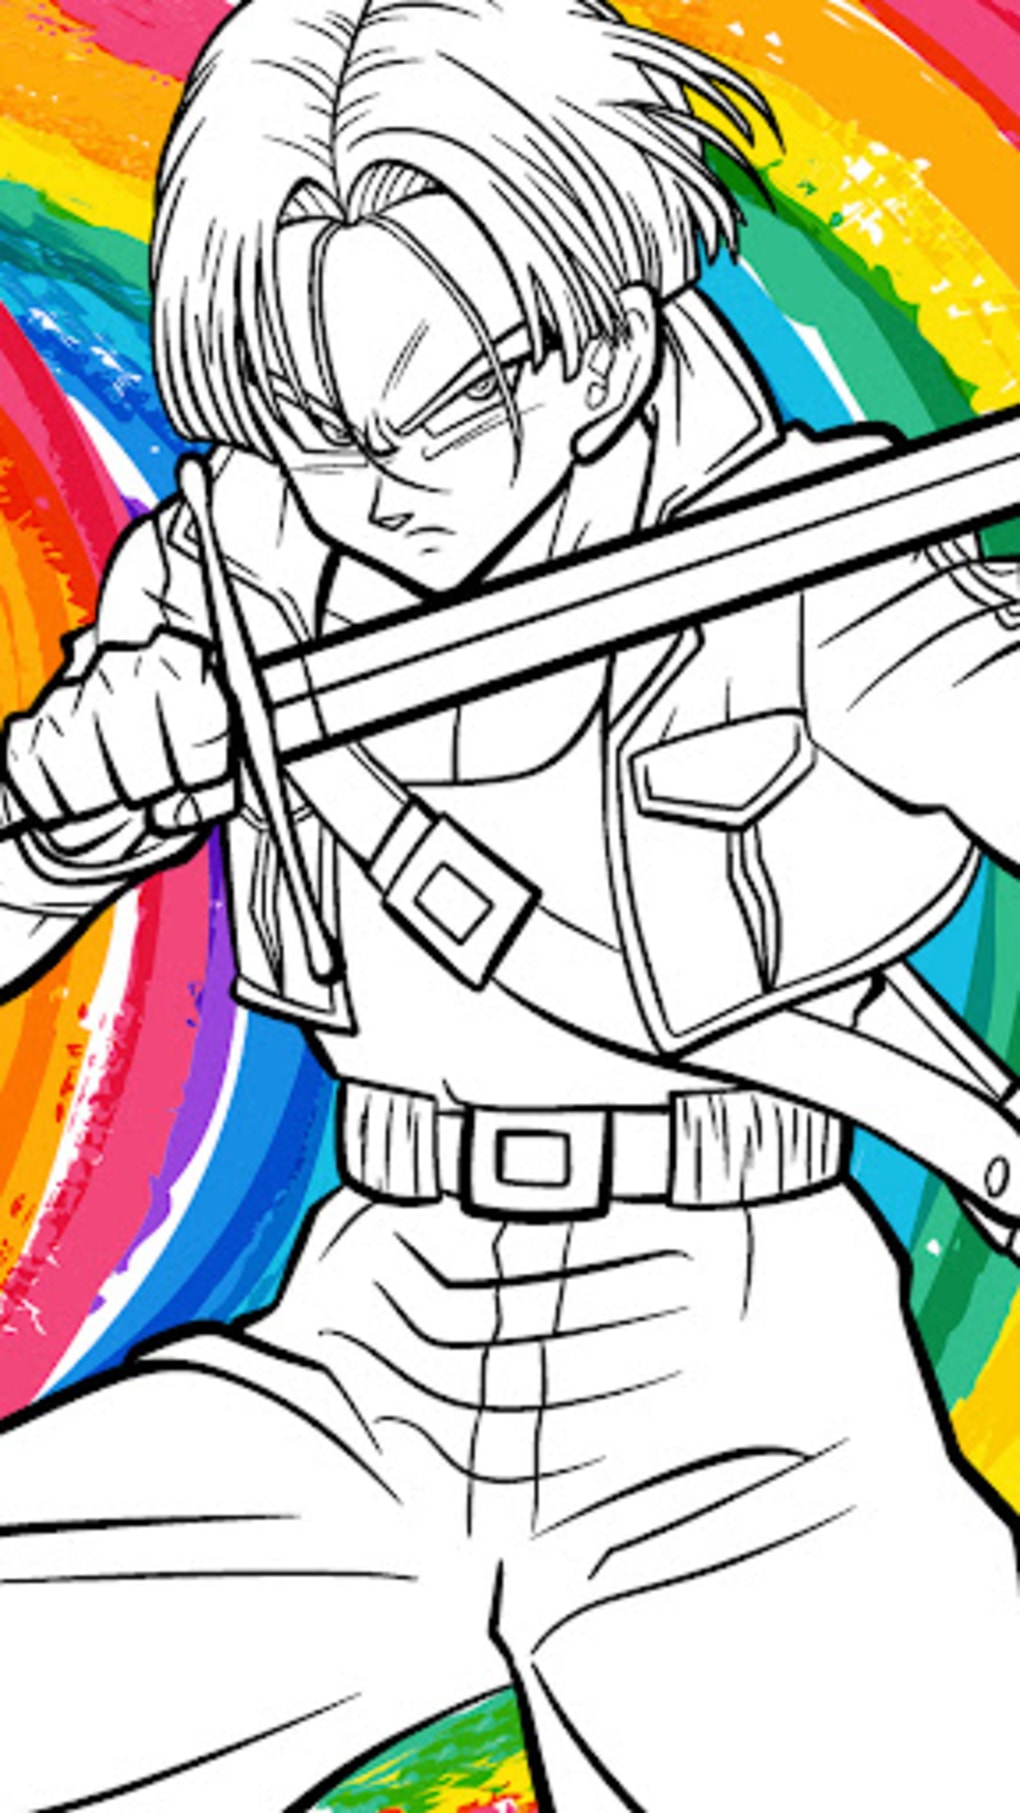 Ultra Instinct Coloring Book para Android - Download